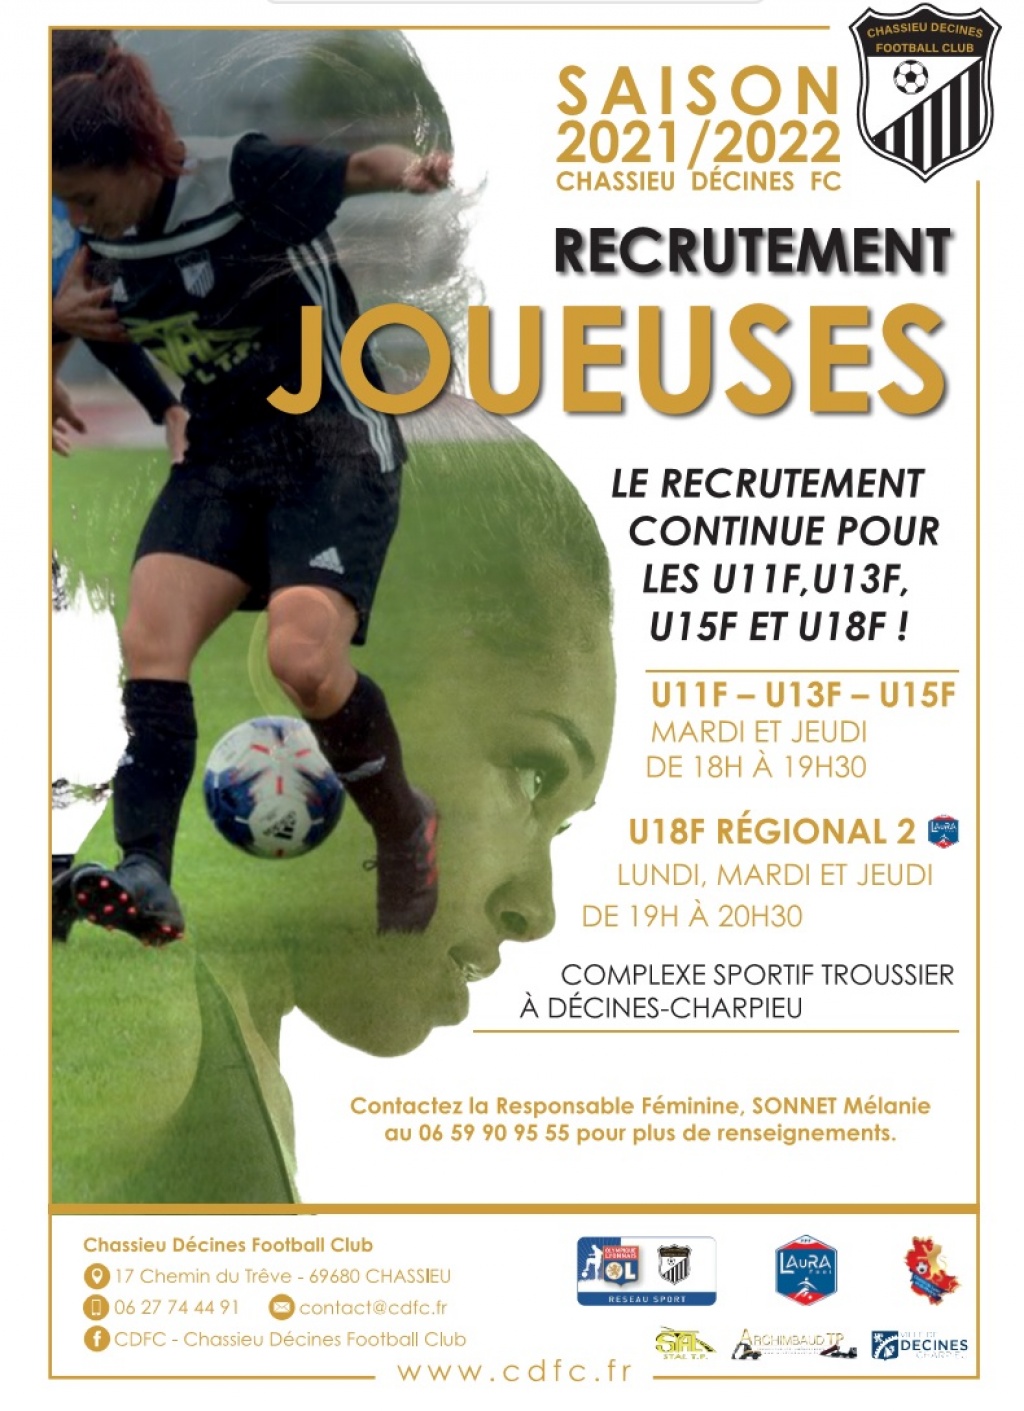 Chassieu Décines recrute joueuses 